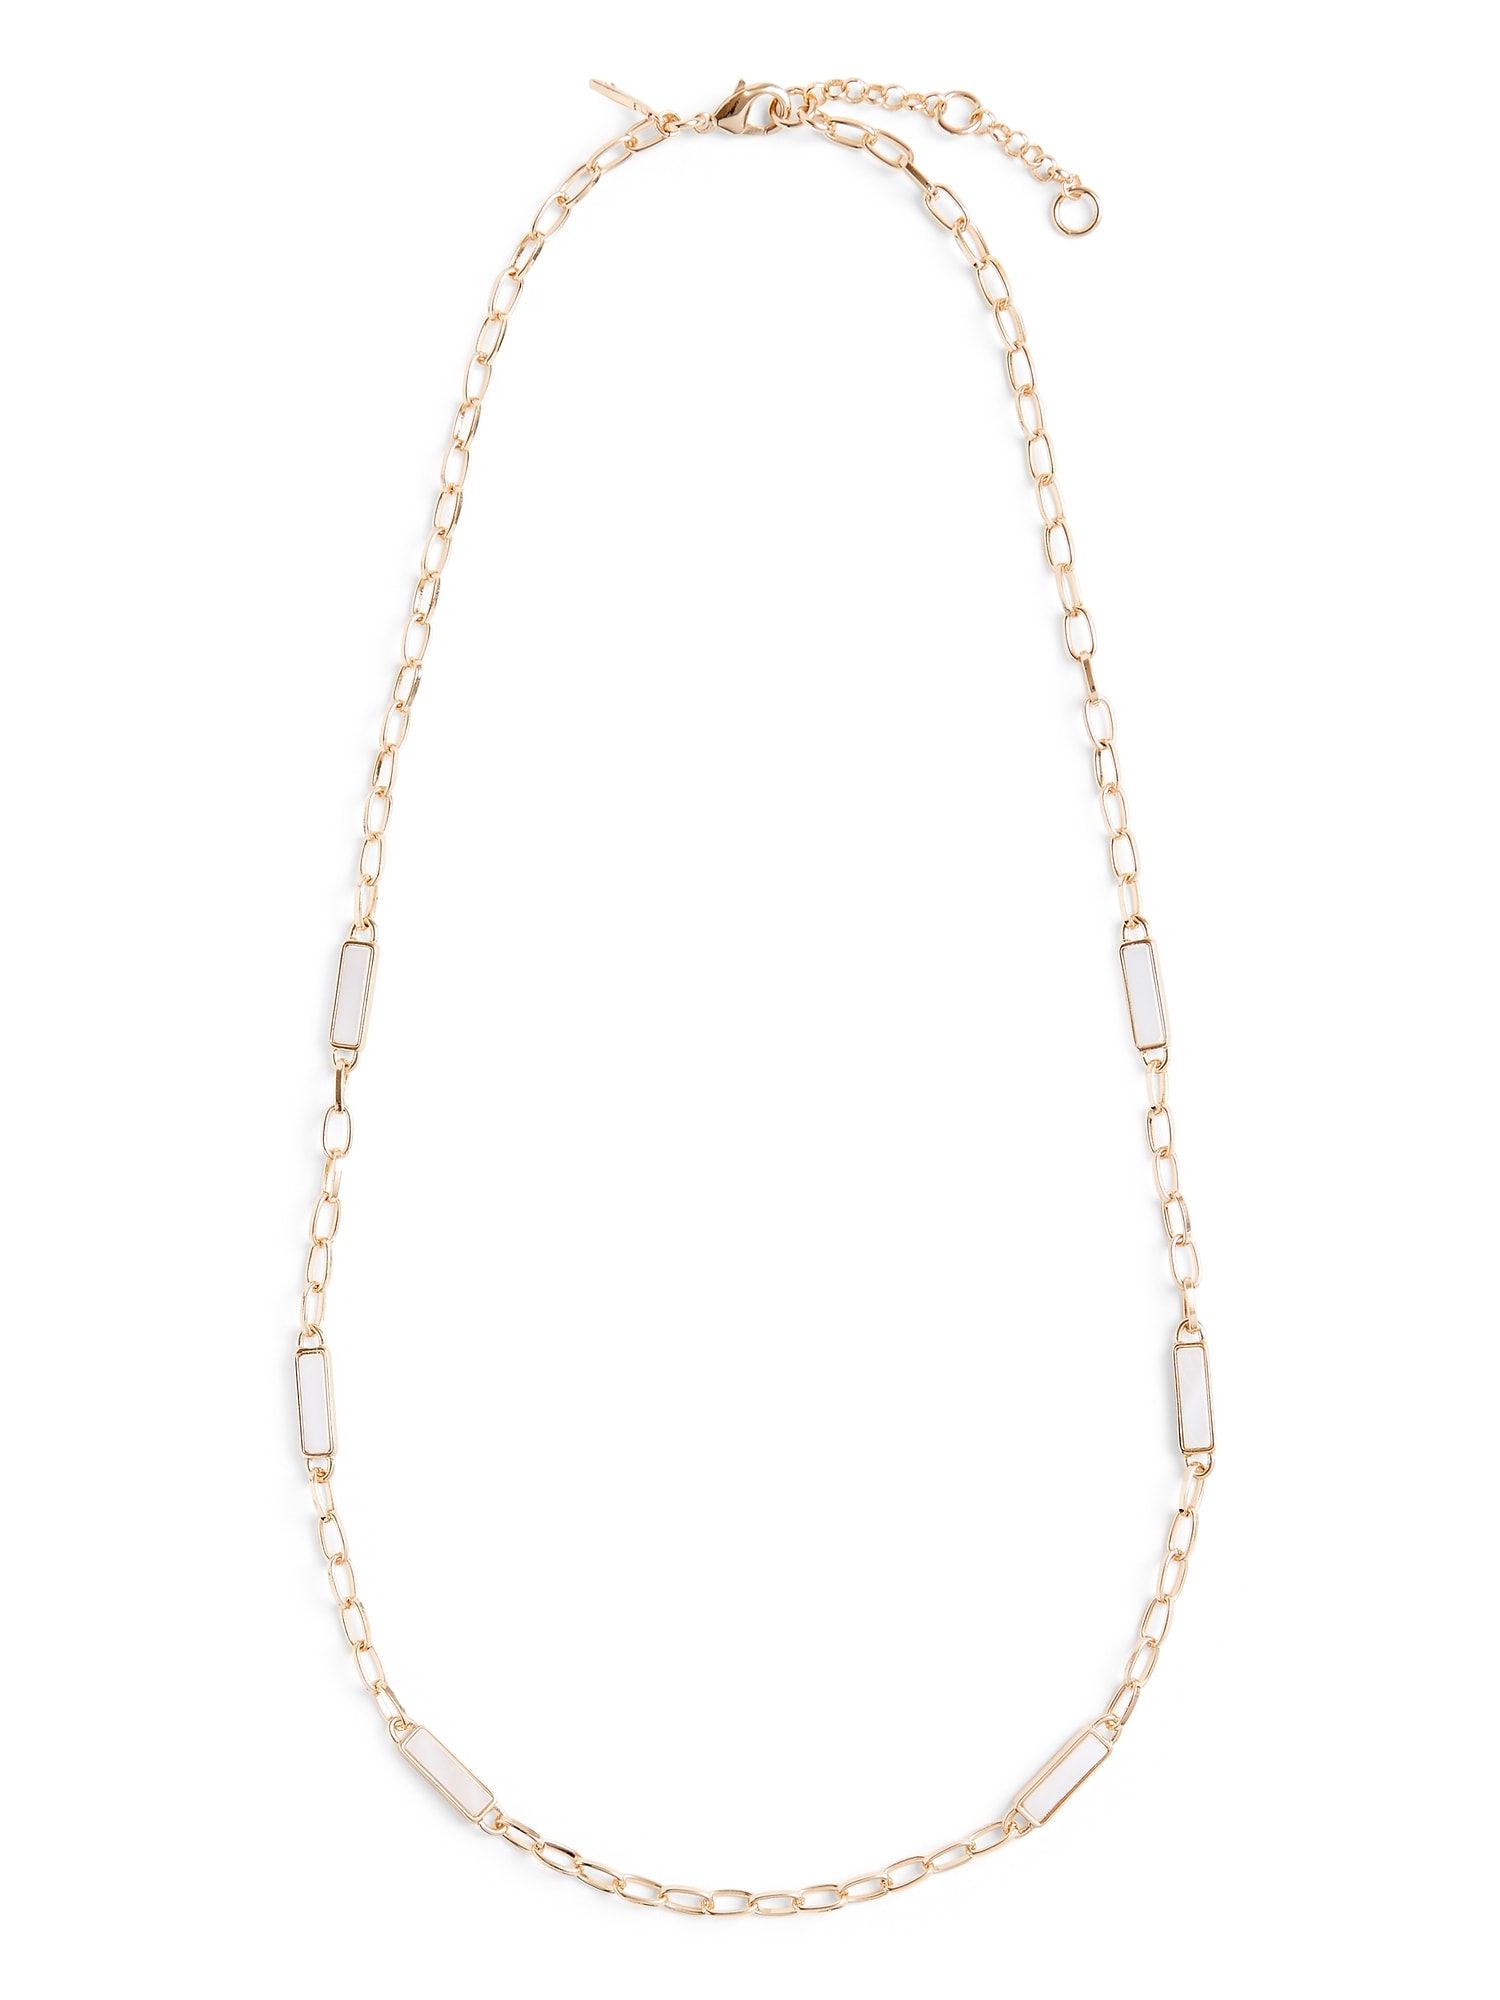 Collier sautoir long coquillage